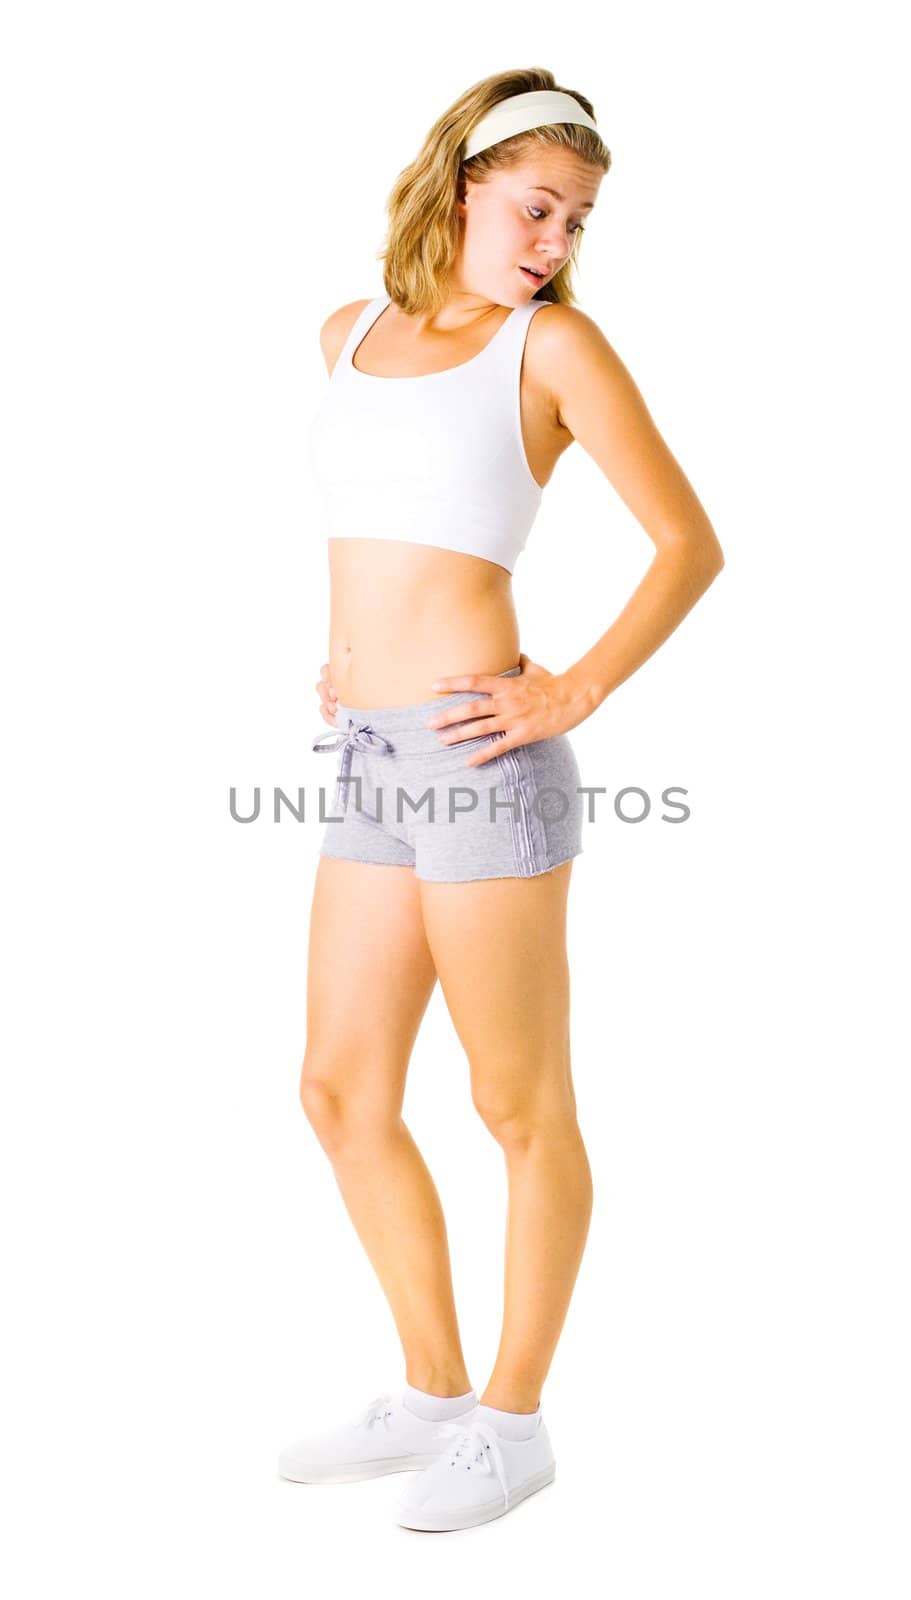 Young woman working out on a white background, from a complete series.